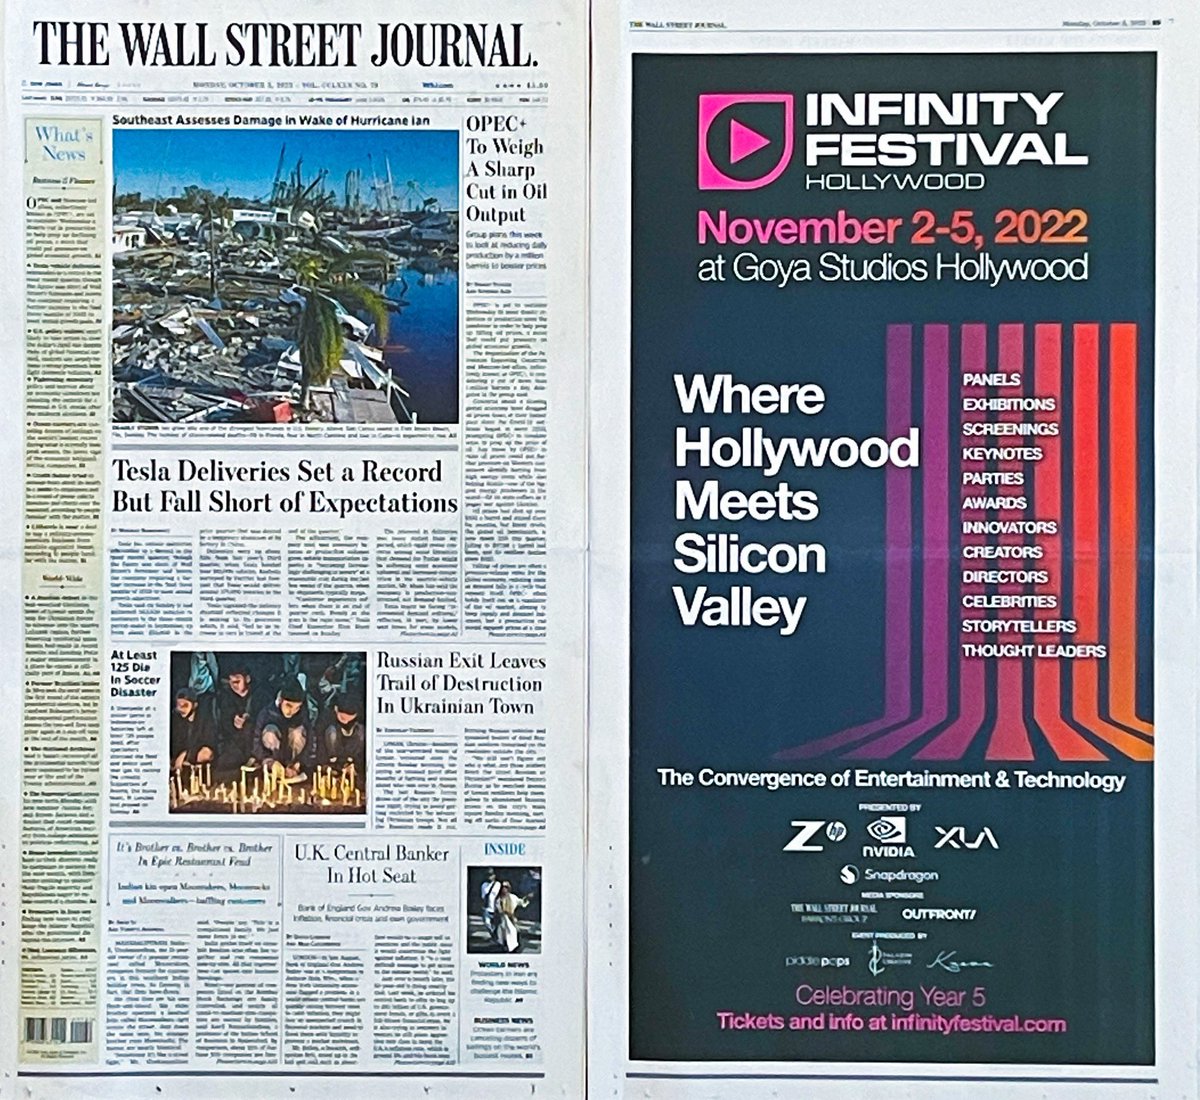 Bam💥 Thank you WSJ! • Infinity Festival will be held Nov 2-5, 2022.  infinityfestival.com  #experienceif #InfinityFestival #xperienceIF22 #Tech #Media #IFHollywood22 #festival #losangeles #hollywood #TWSJ